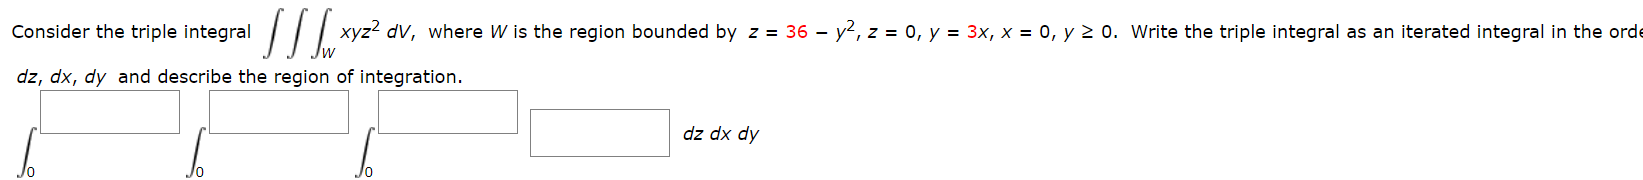 Consider the triple integral
xyz2 dV, where W is the region bounded by z = 36 – y2, z = 0, y = 3x, x = 0, y 2 0. Write the triple integral as an iterated integral in the orde
dz, dx, dy and describe the region of integration.
Ap xp zp
